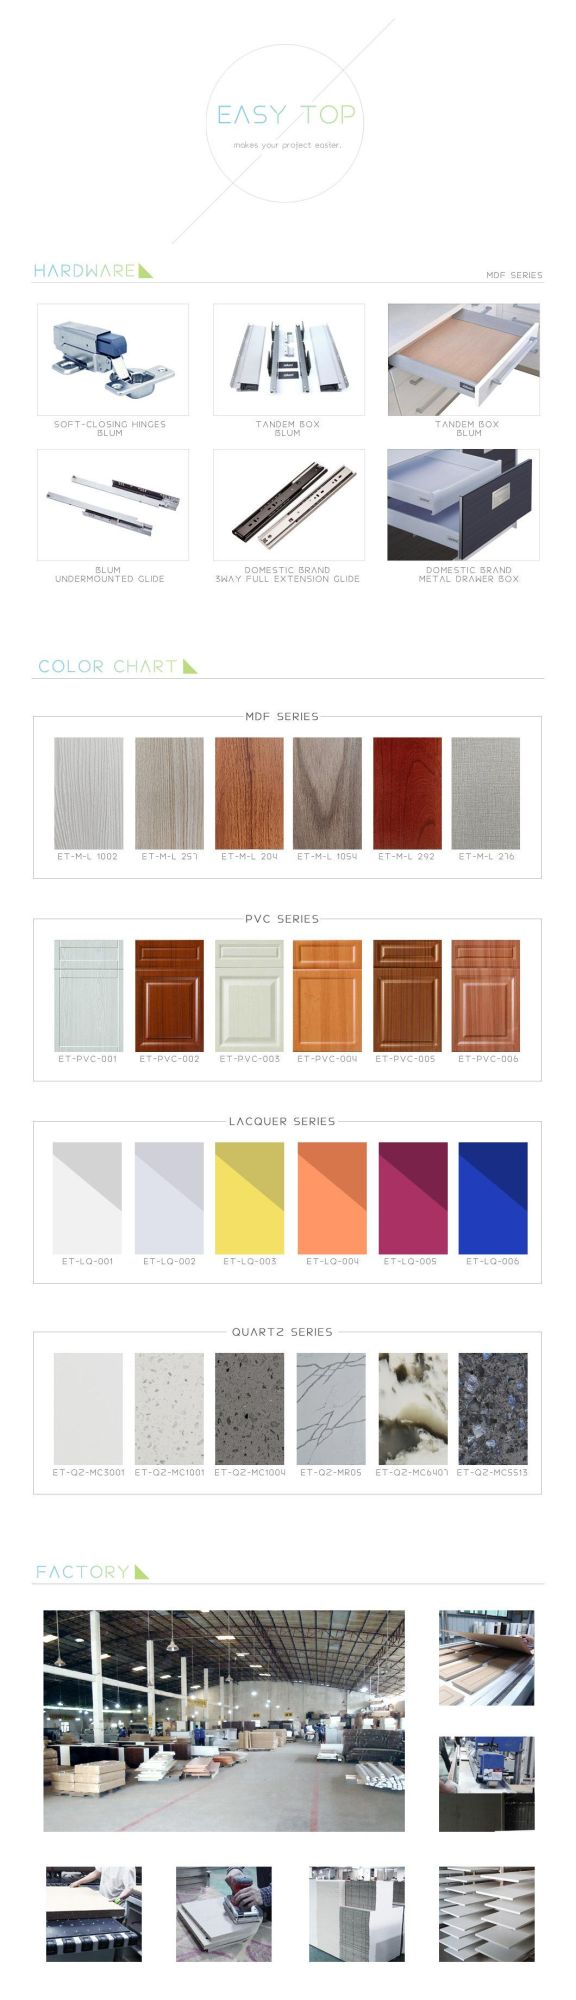 Wood Grain Mixed Grey Slab Open Joinery MFC High Quality Kitchen Cabinets Flat Pack Furniture